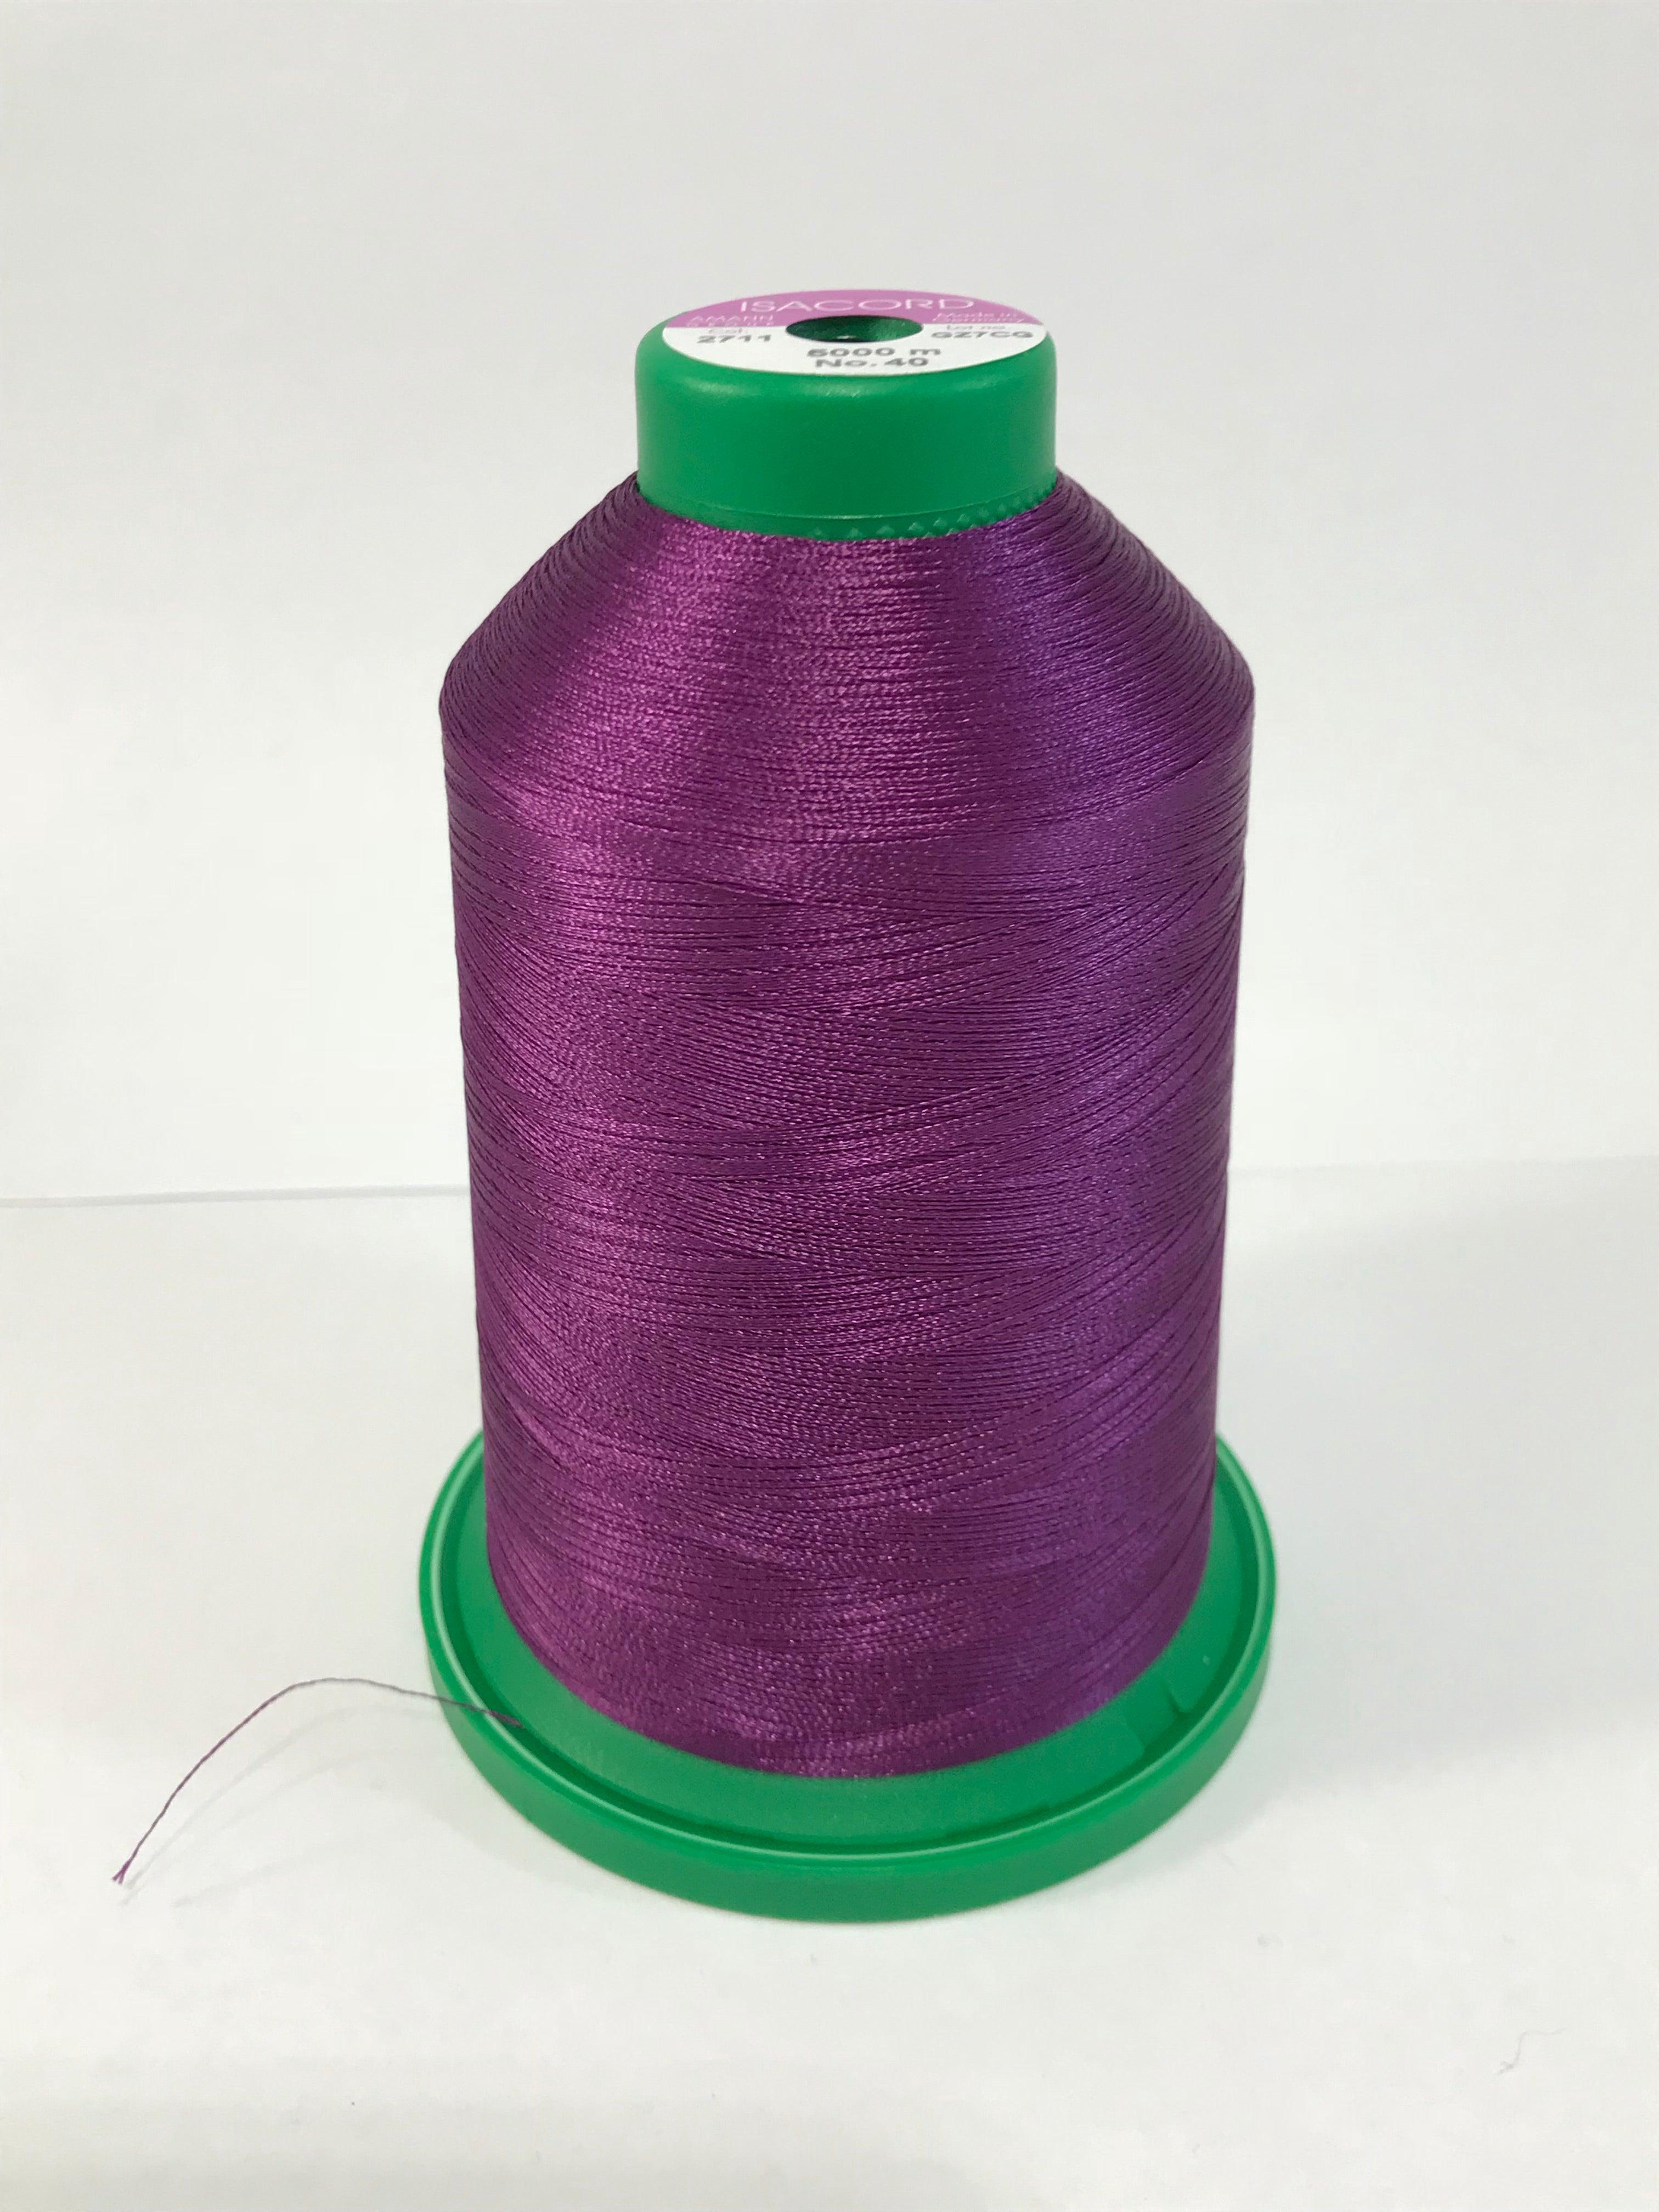 2711 - DARK CURRENT - ISACORD EMBROIDERY THREAD 40 WT